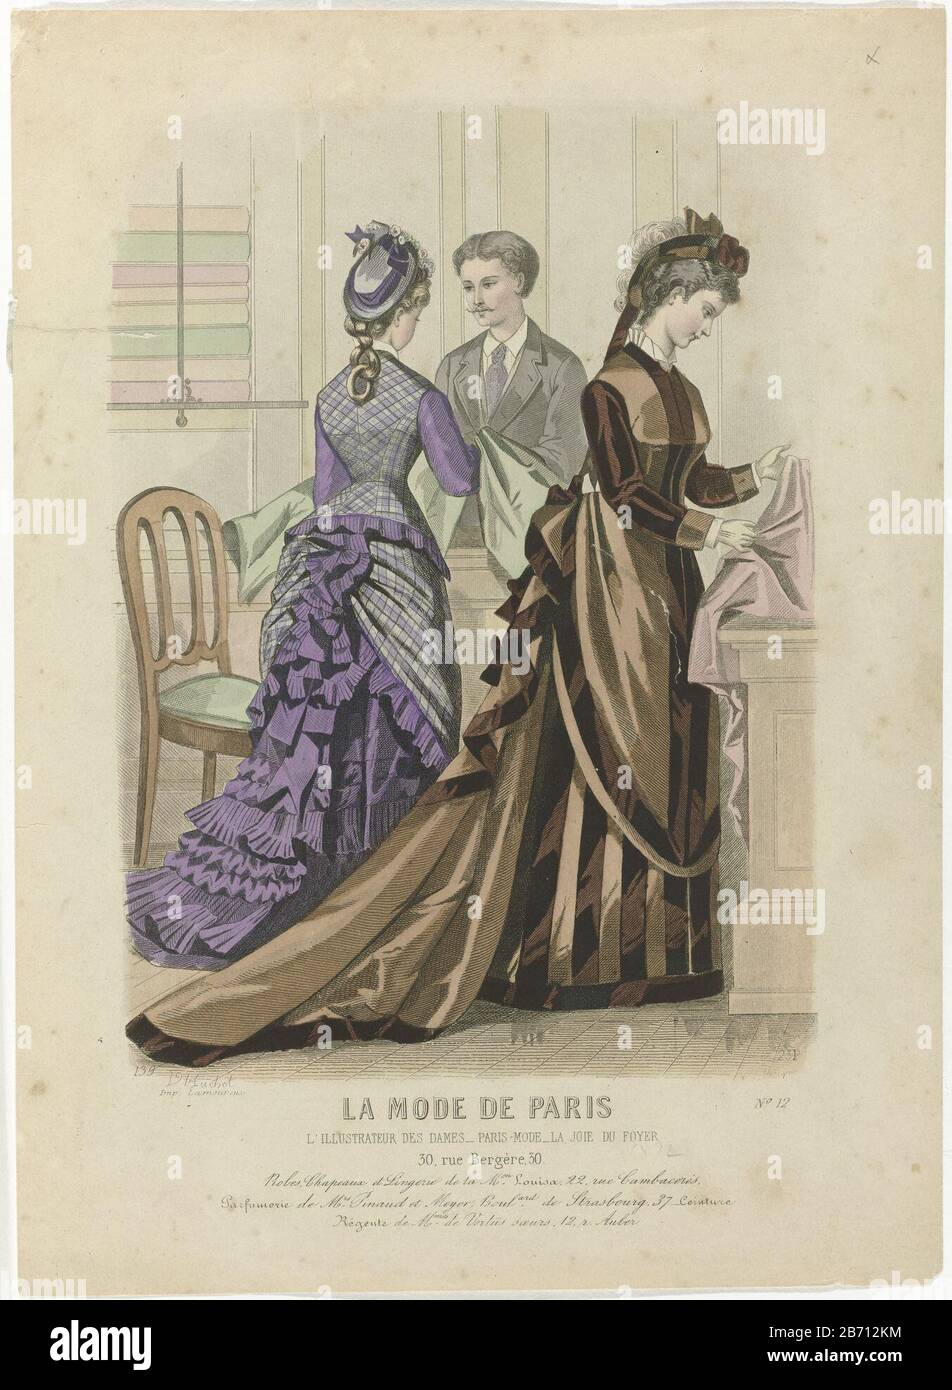 La Mode de Paris, 1874, No.231, No. 12: Robes Chapeaux et Lingeri (...).  Two women look at fabrics in a store. They are dressed in Jokes with  Tournure. The shapes and hats